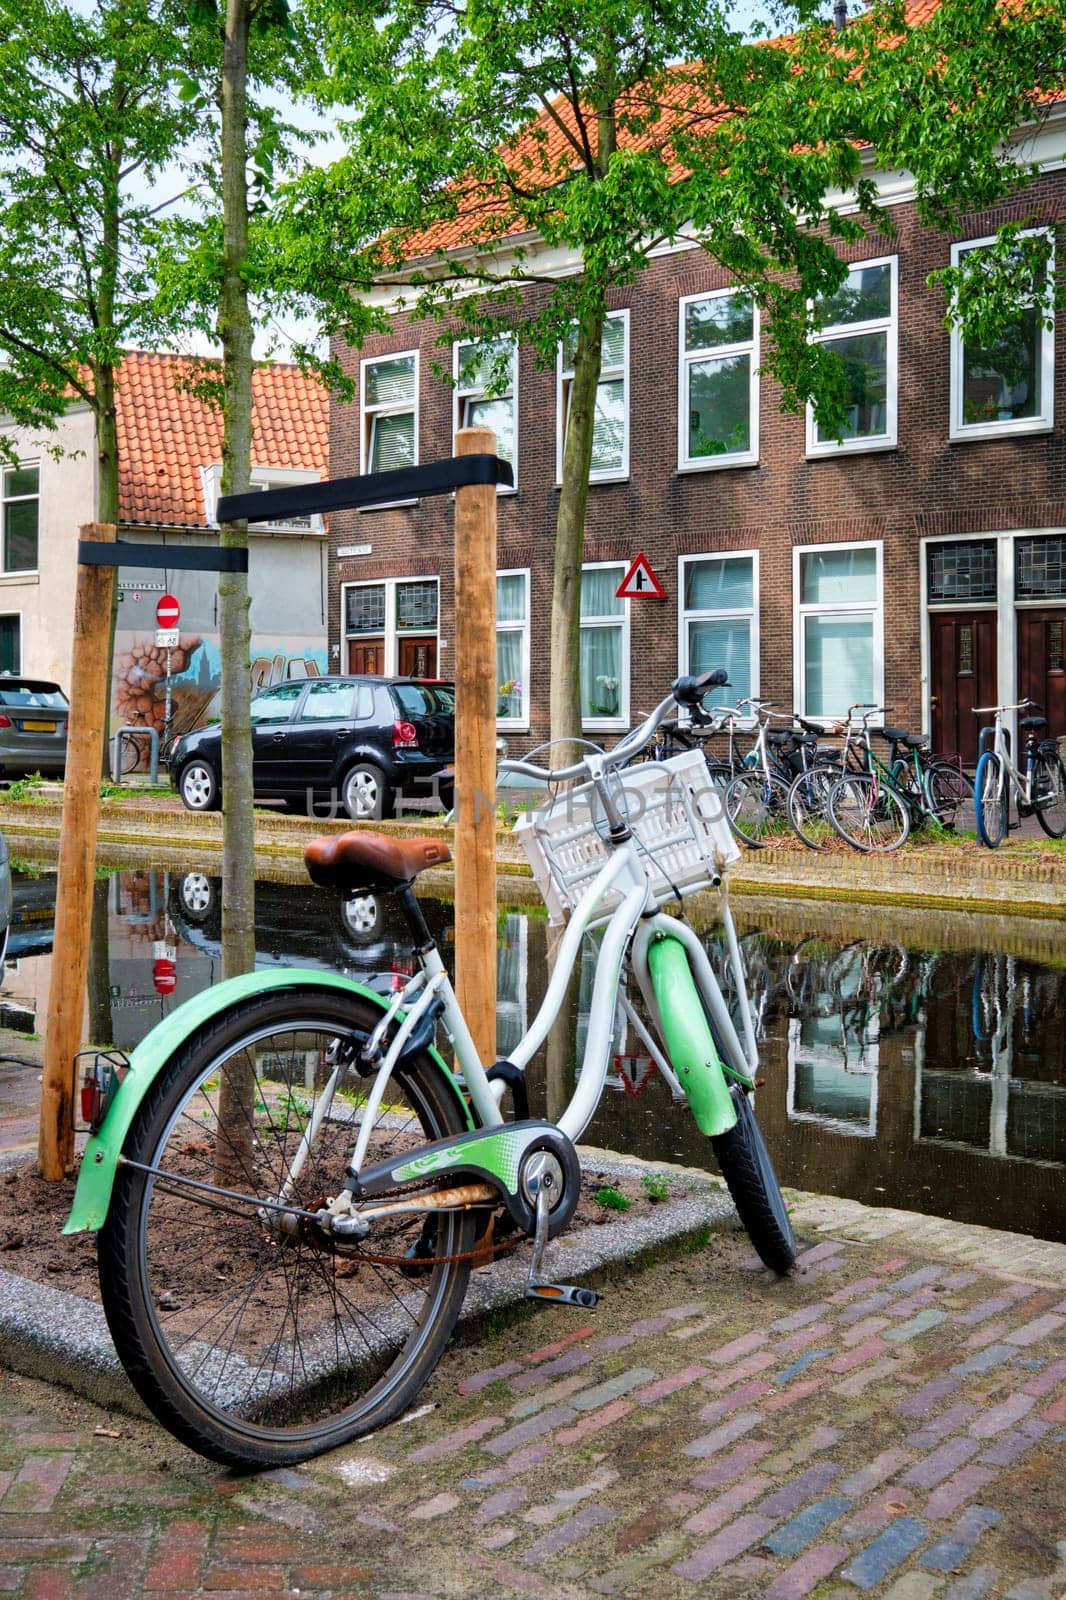 Bicycle parked near the canal in Delft street with old houses. Delft, Netherlands by dimol